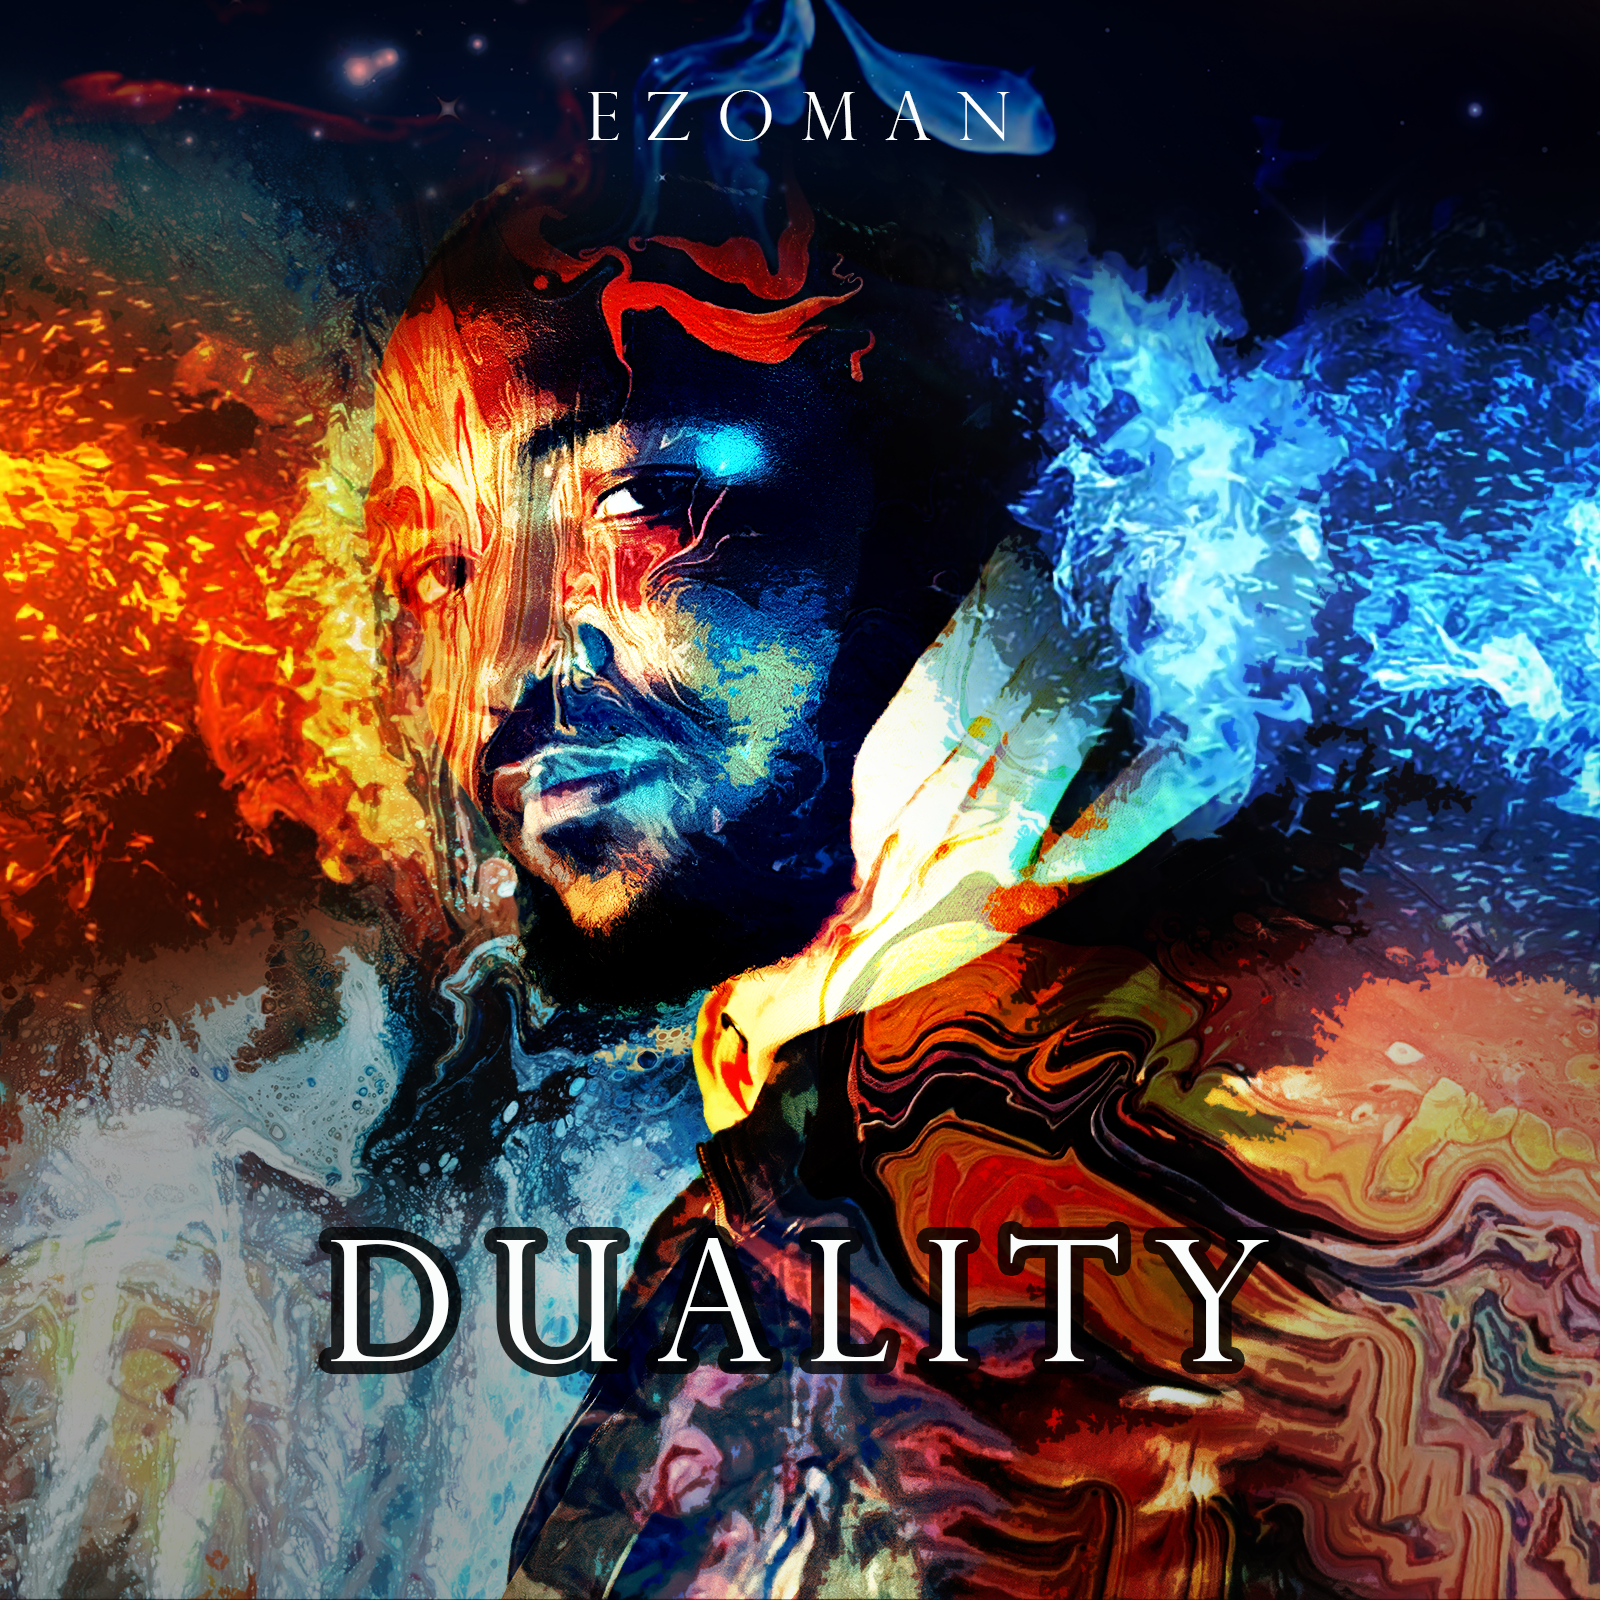 ‘Duality’ is a special record from one of this generation’s most vital voices.